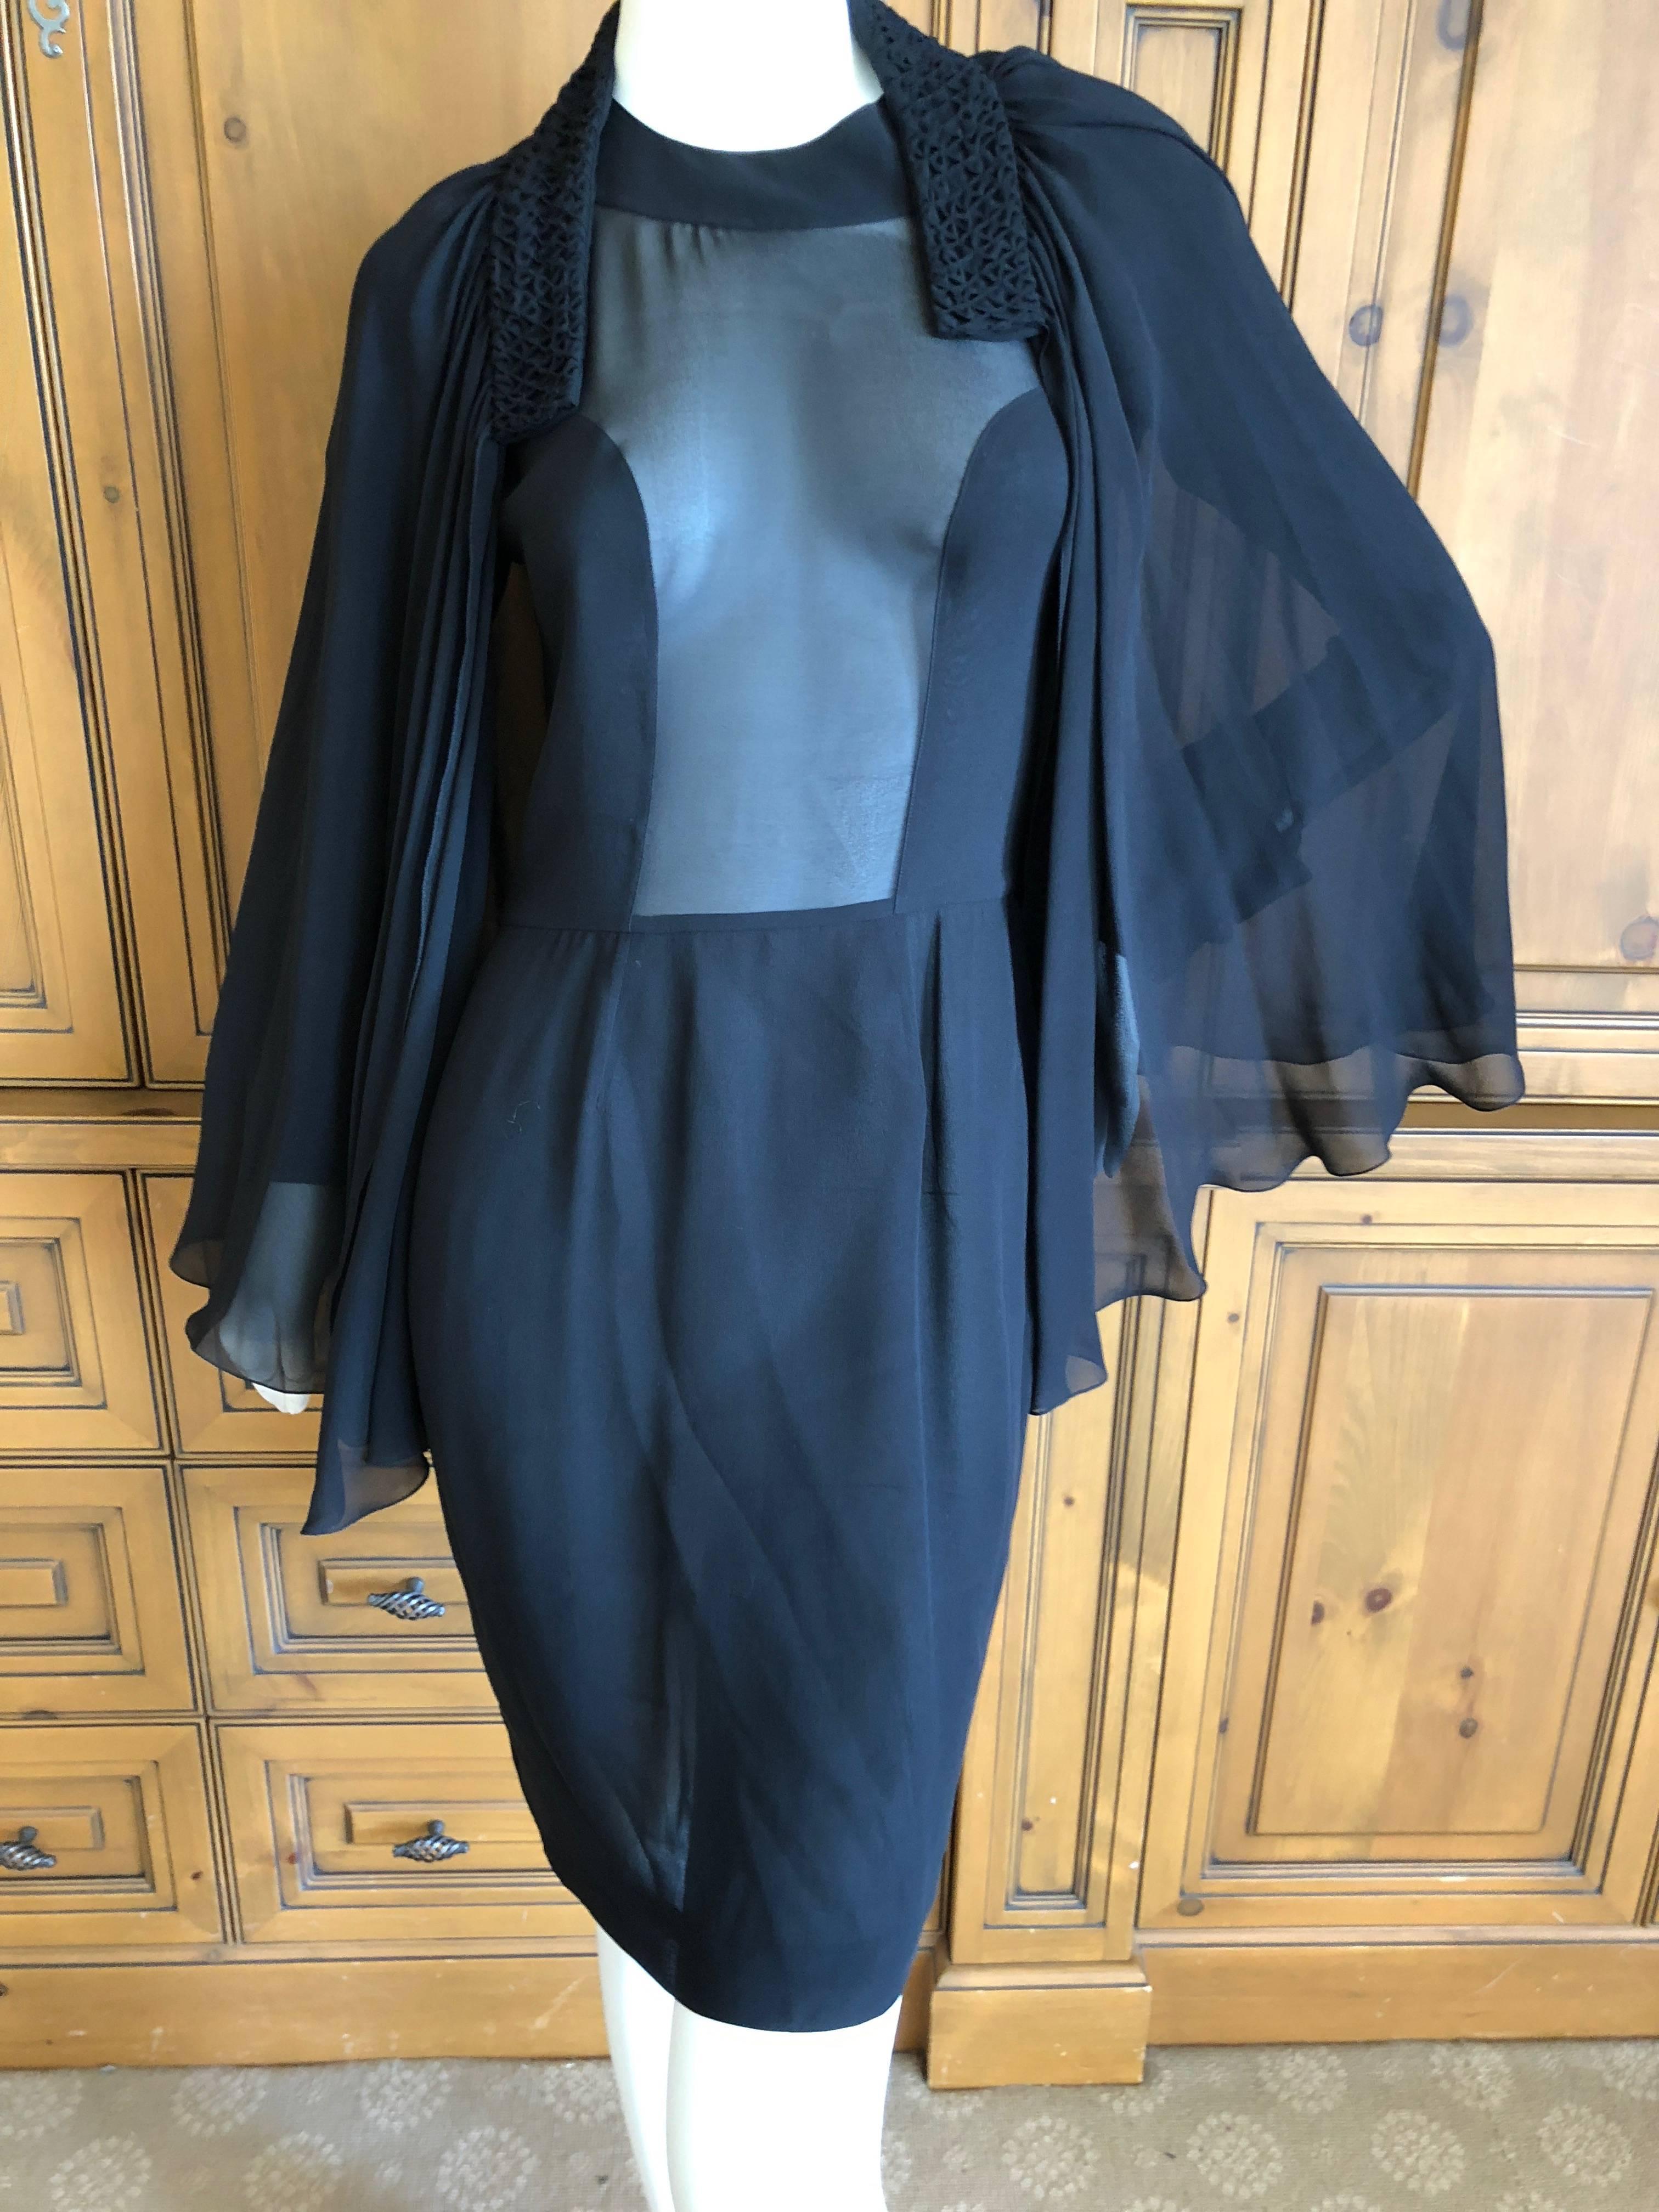 Christian Lacroix Vintage Sheer Black Silk Cocktail Dress with Matching Cape For Sale 8